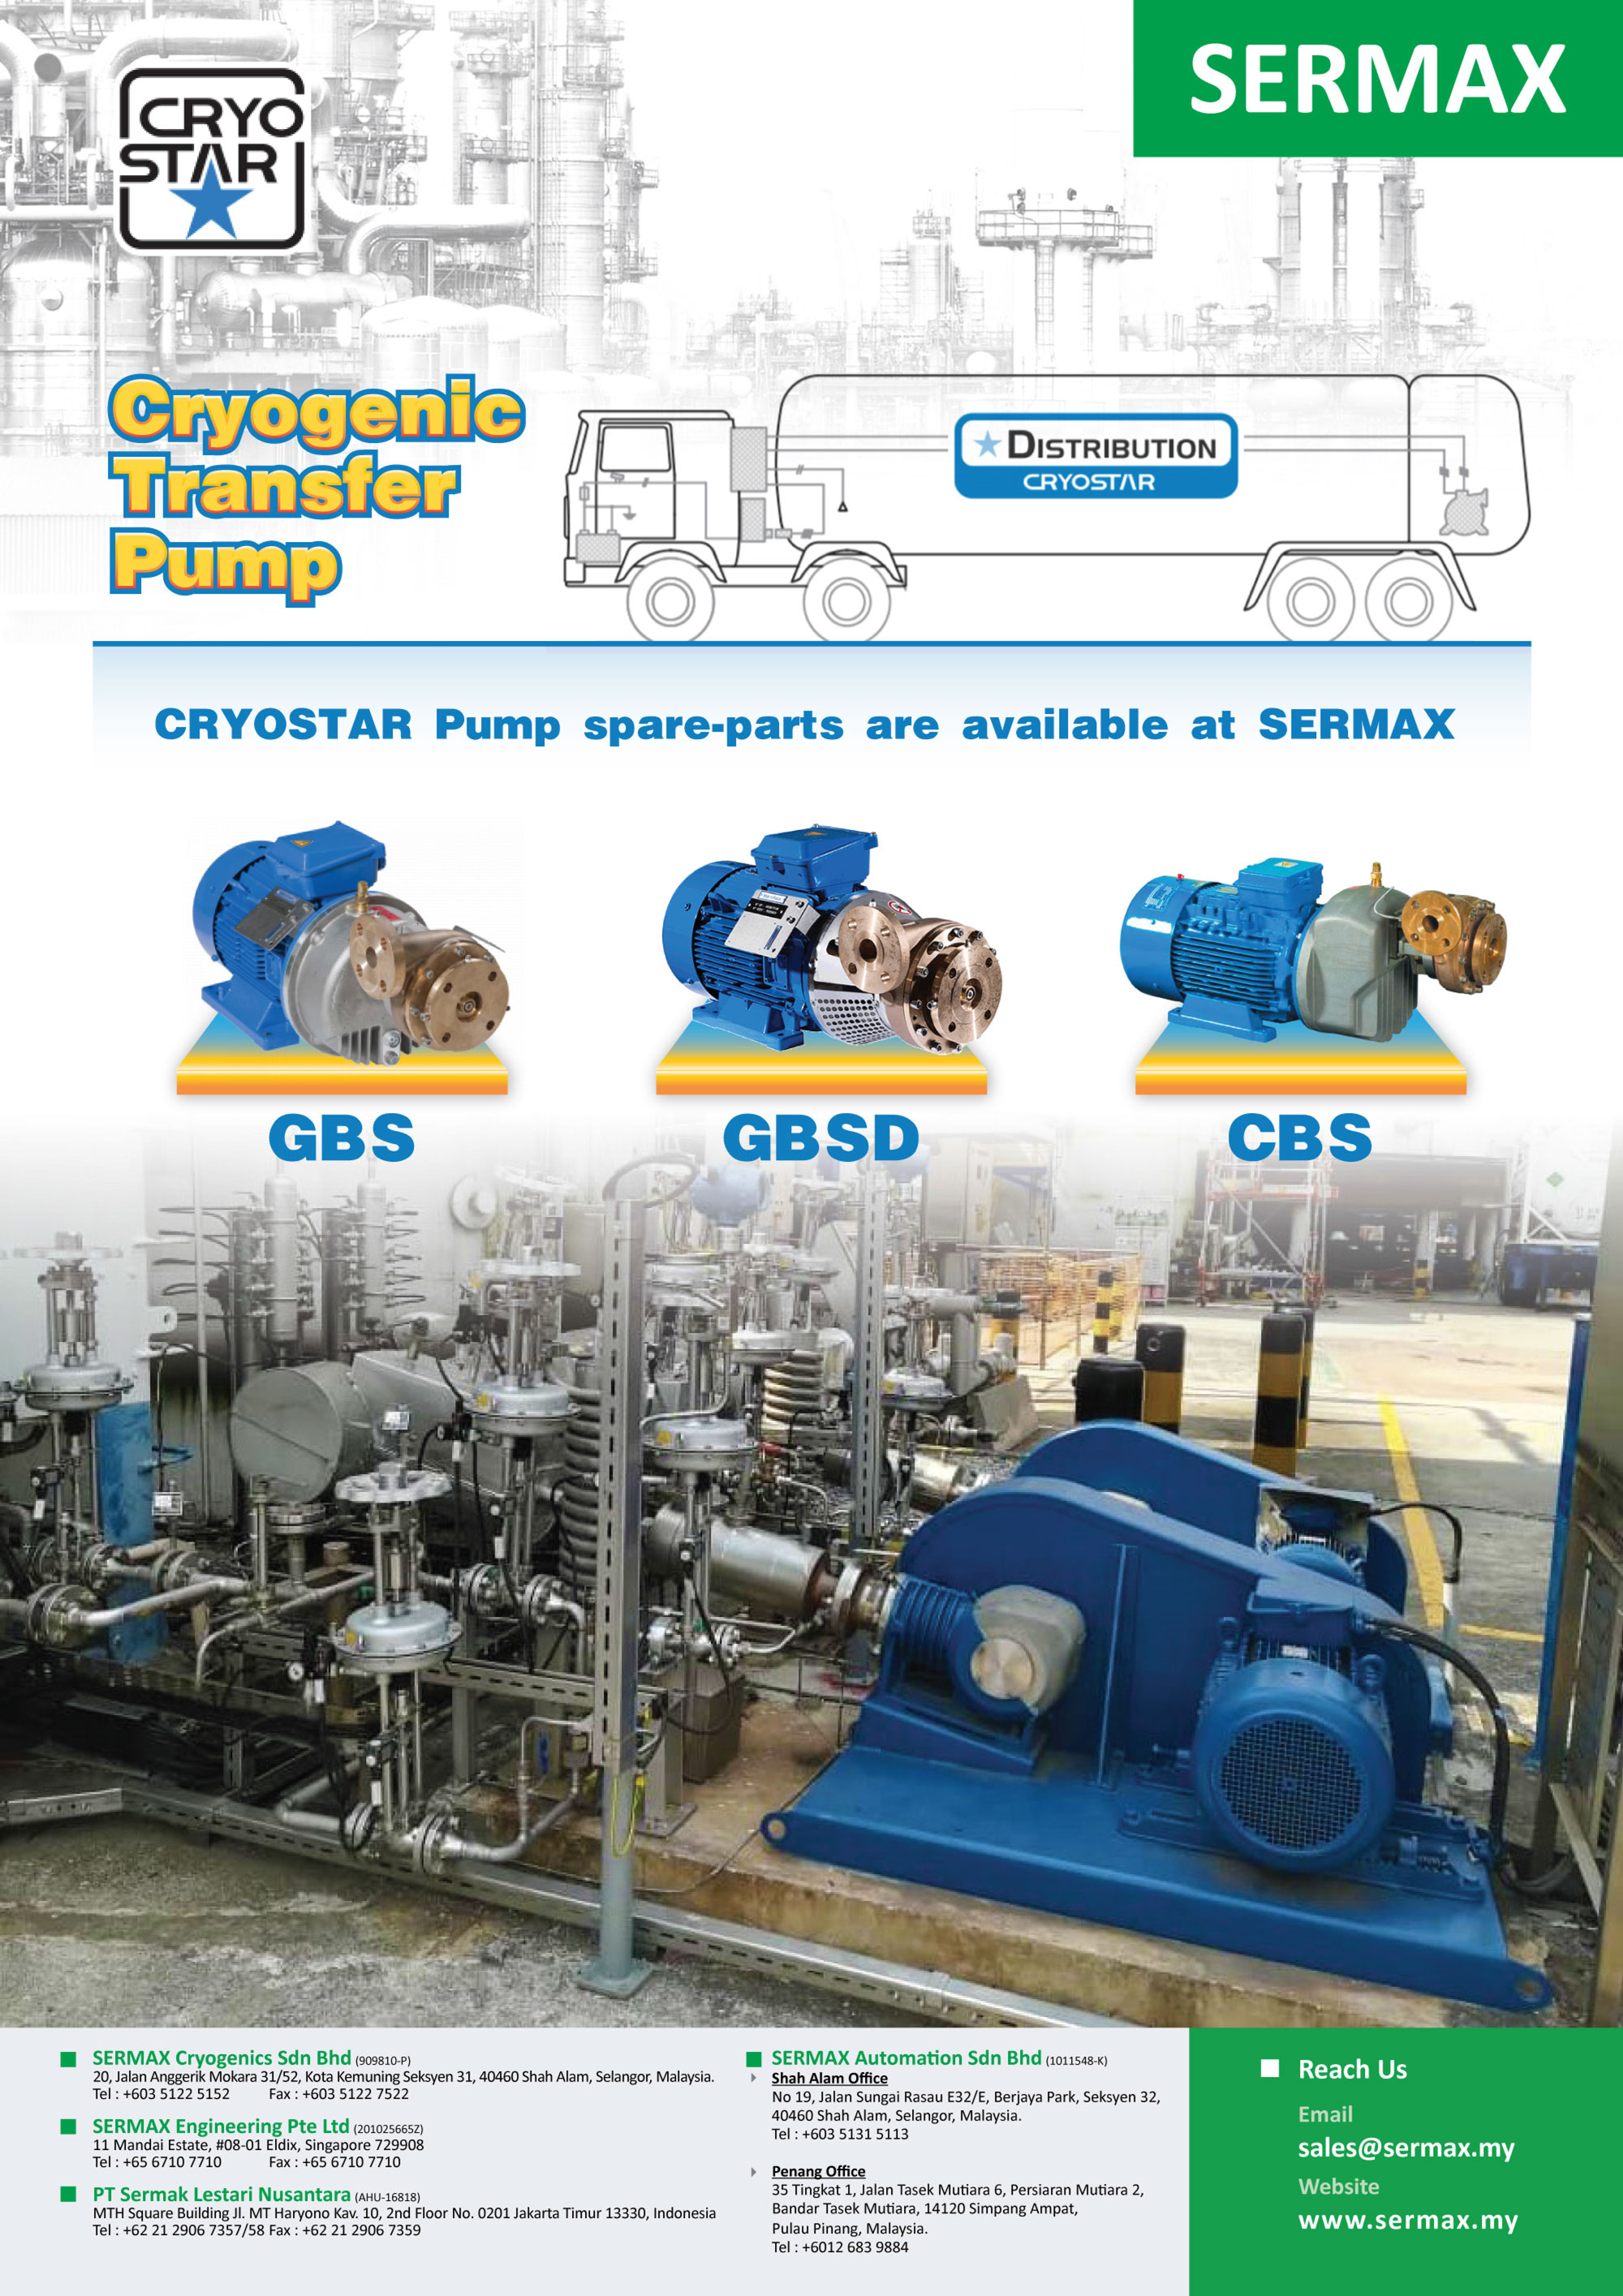 CRYOSTAR Pumps Spare Parts available now - Sermax would like to inform that Cryostar pump spare parts are now available.